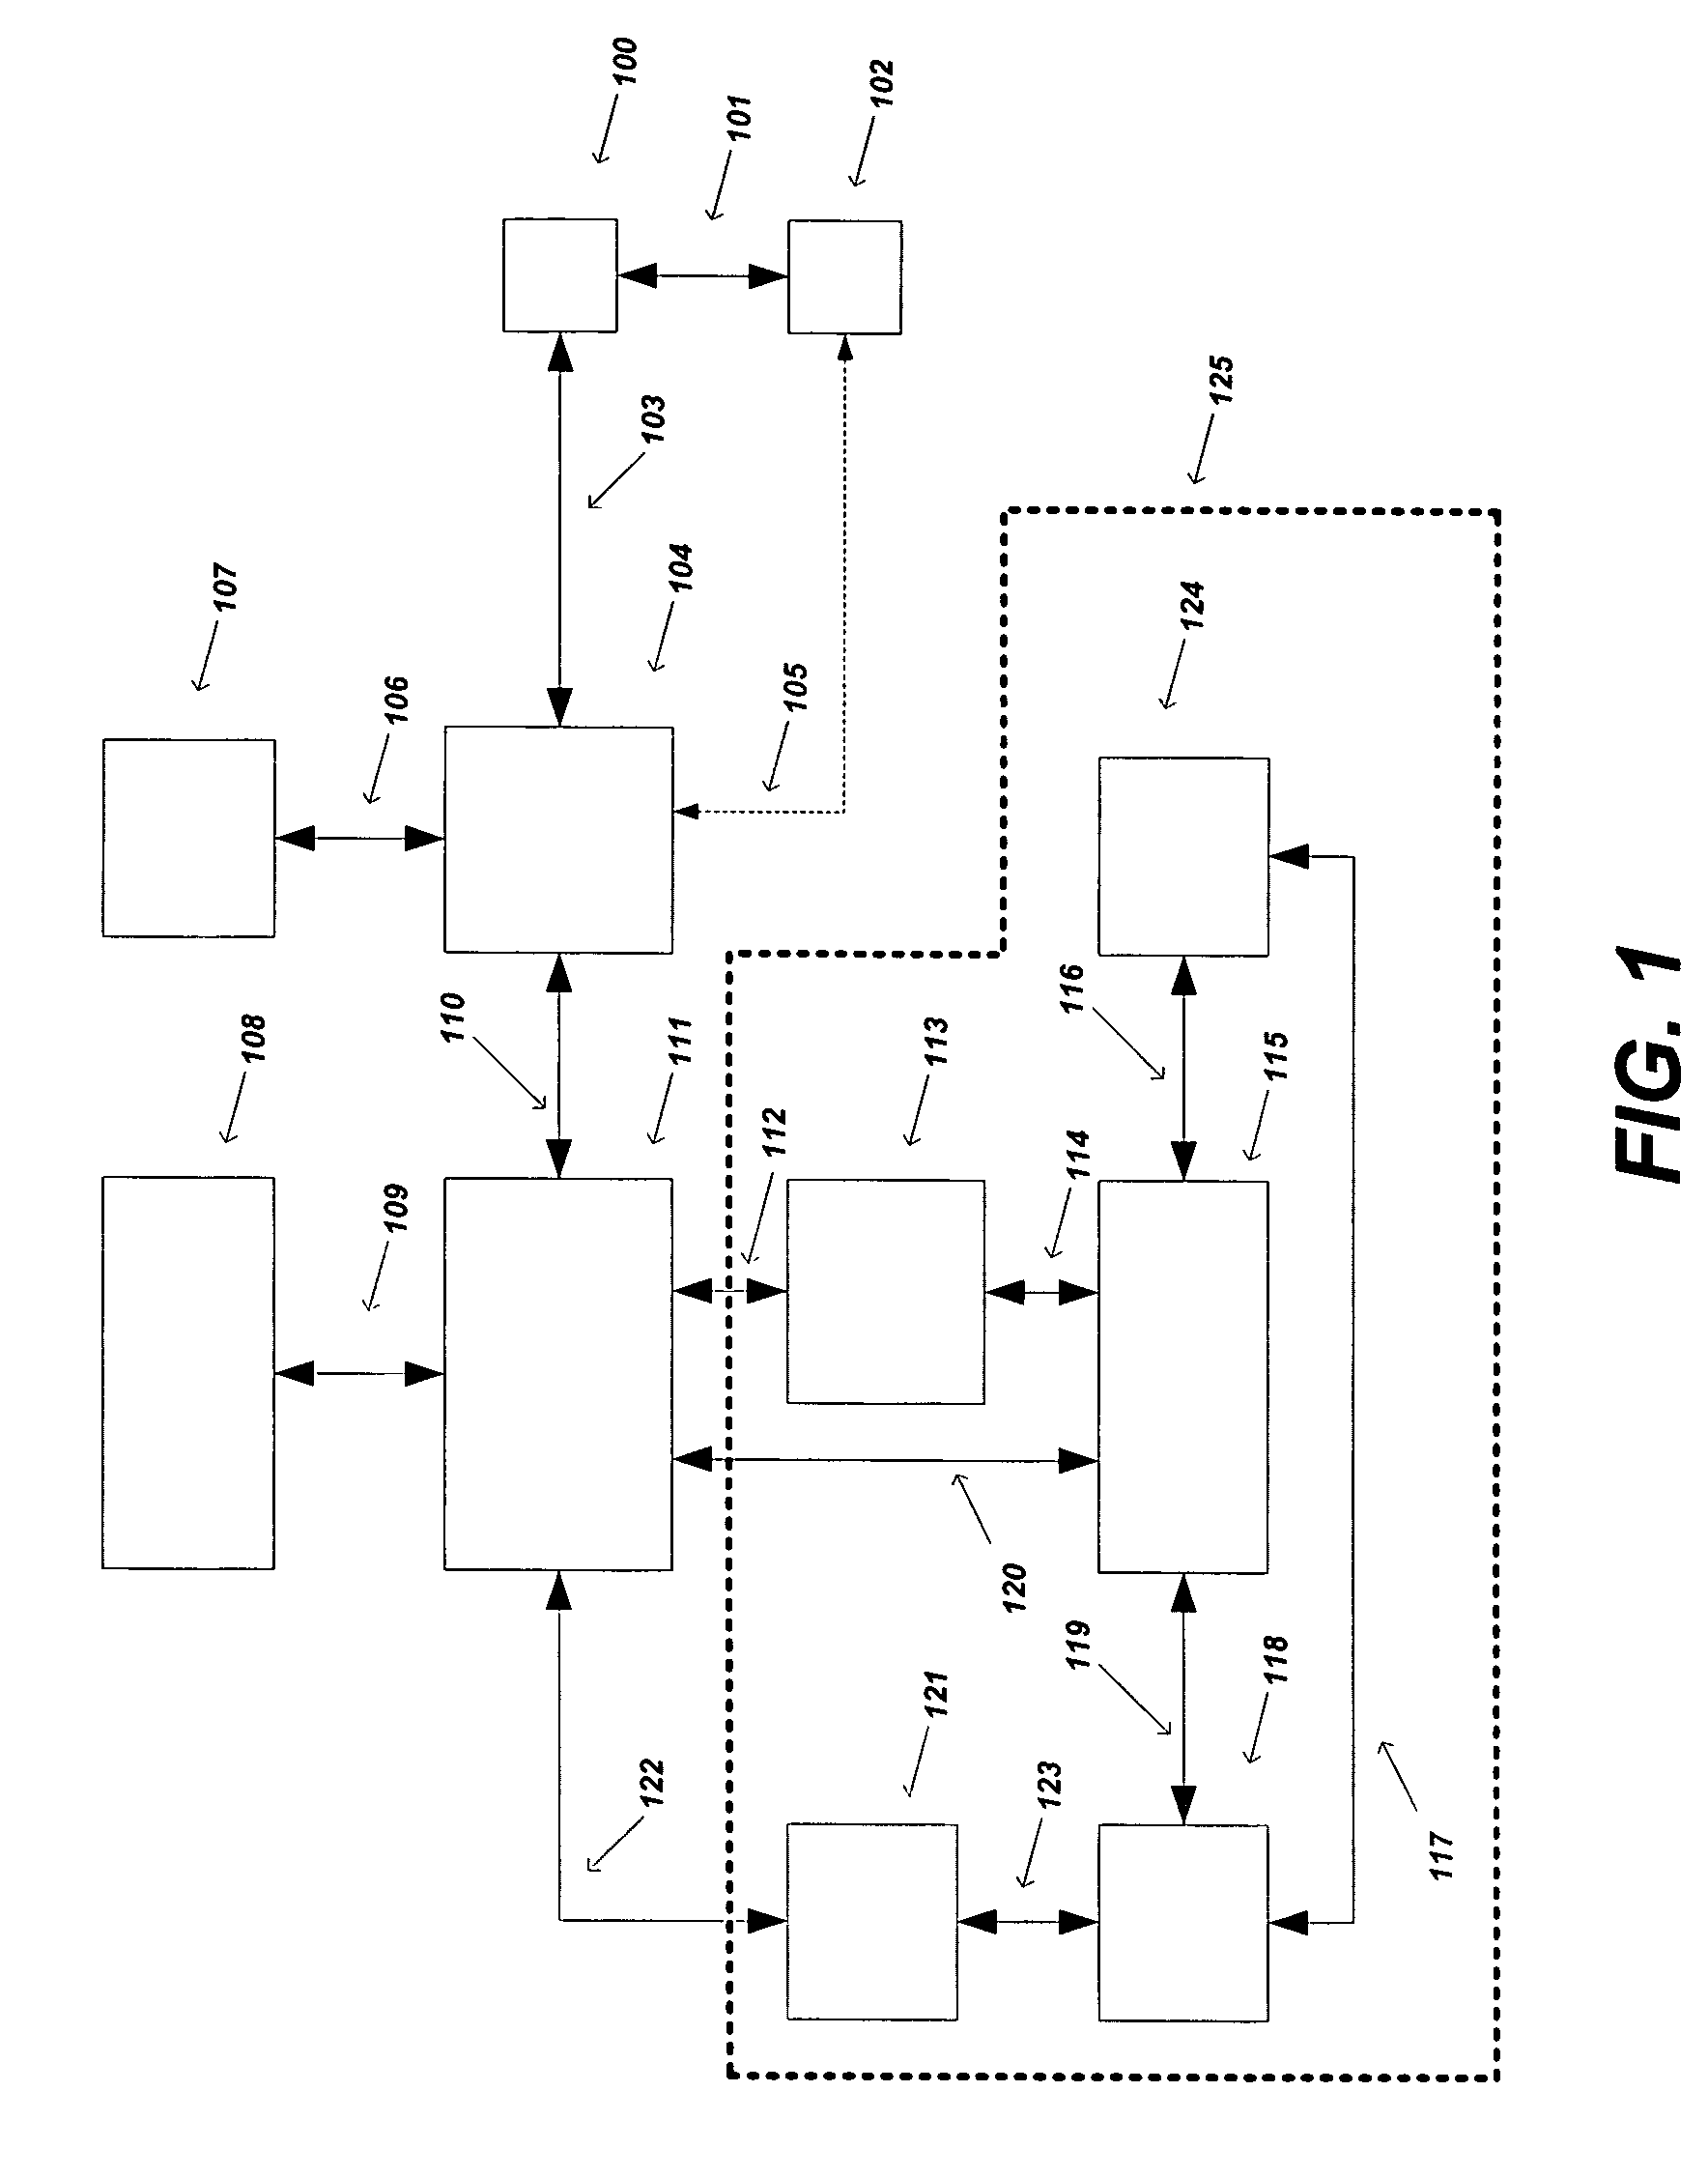 Method and system for saving and retrieving spatial related information